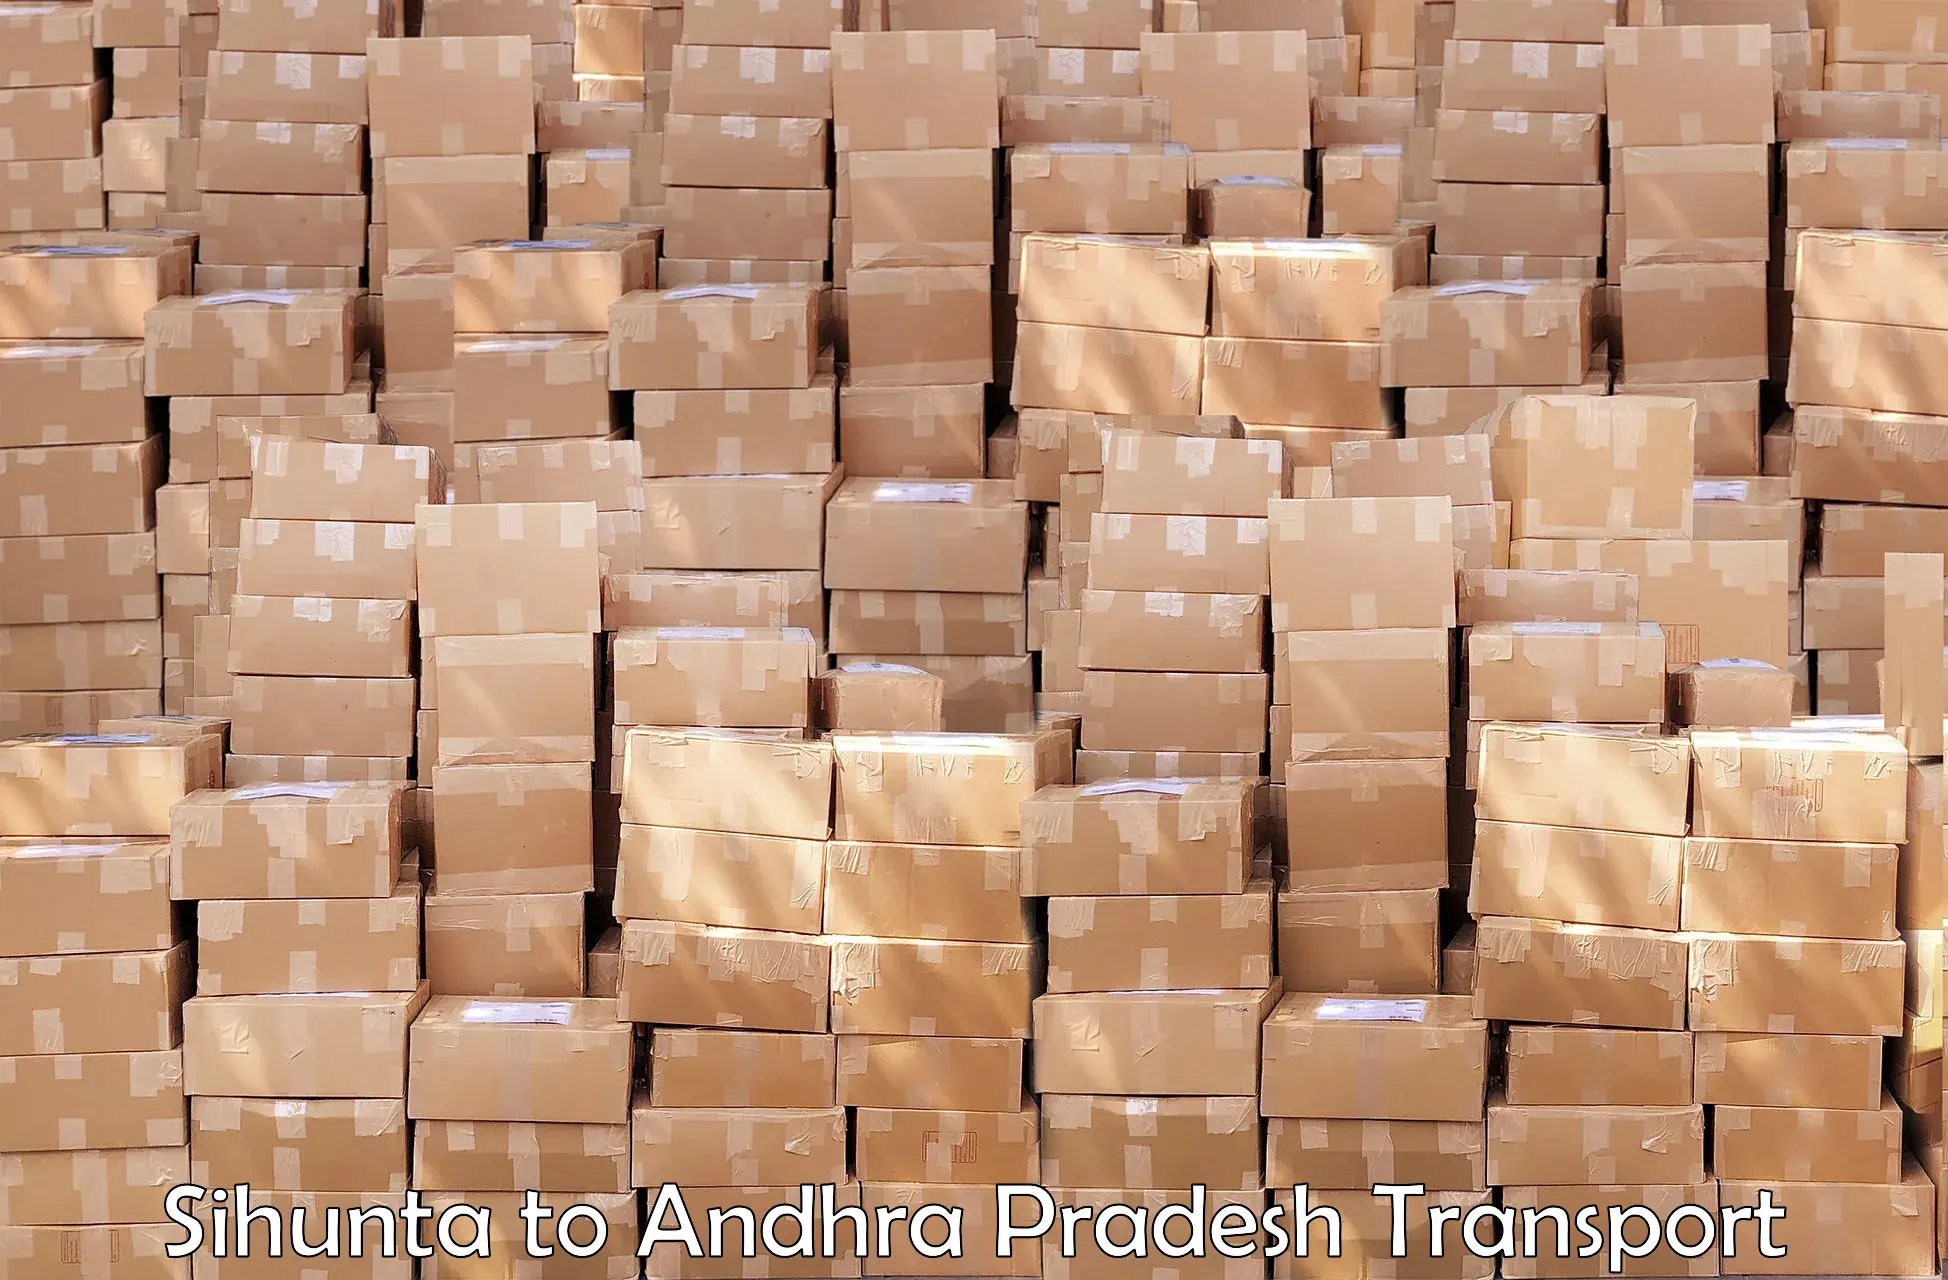 Container transport service Sihunta to Andhra Pradesh